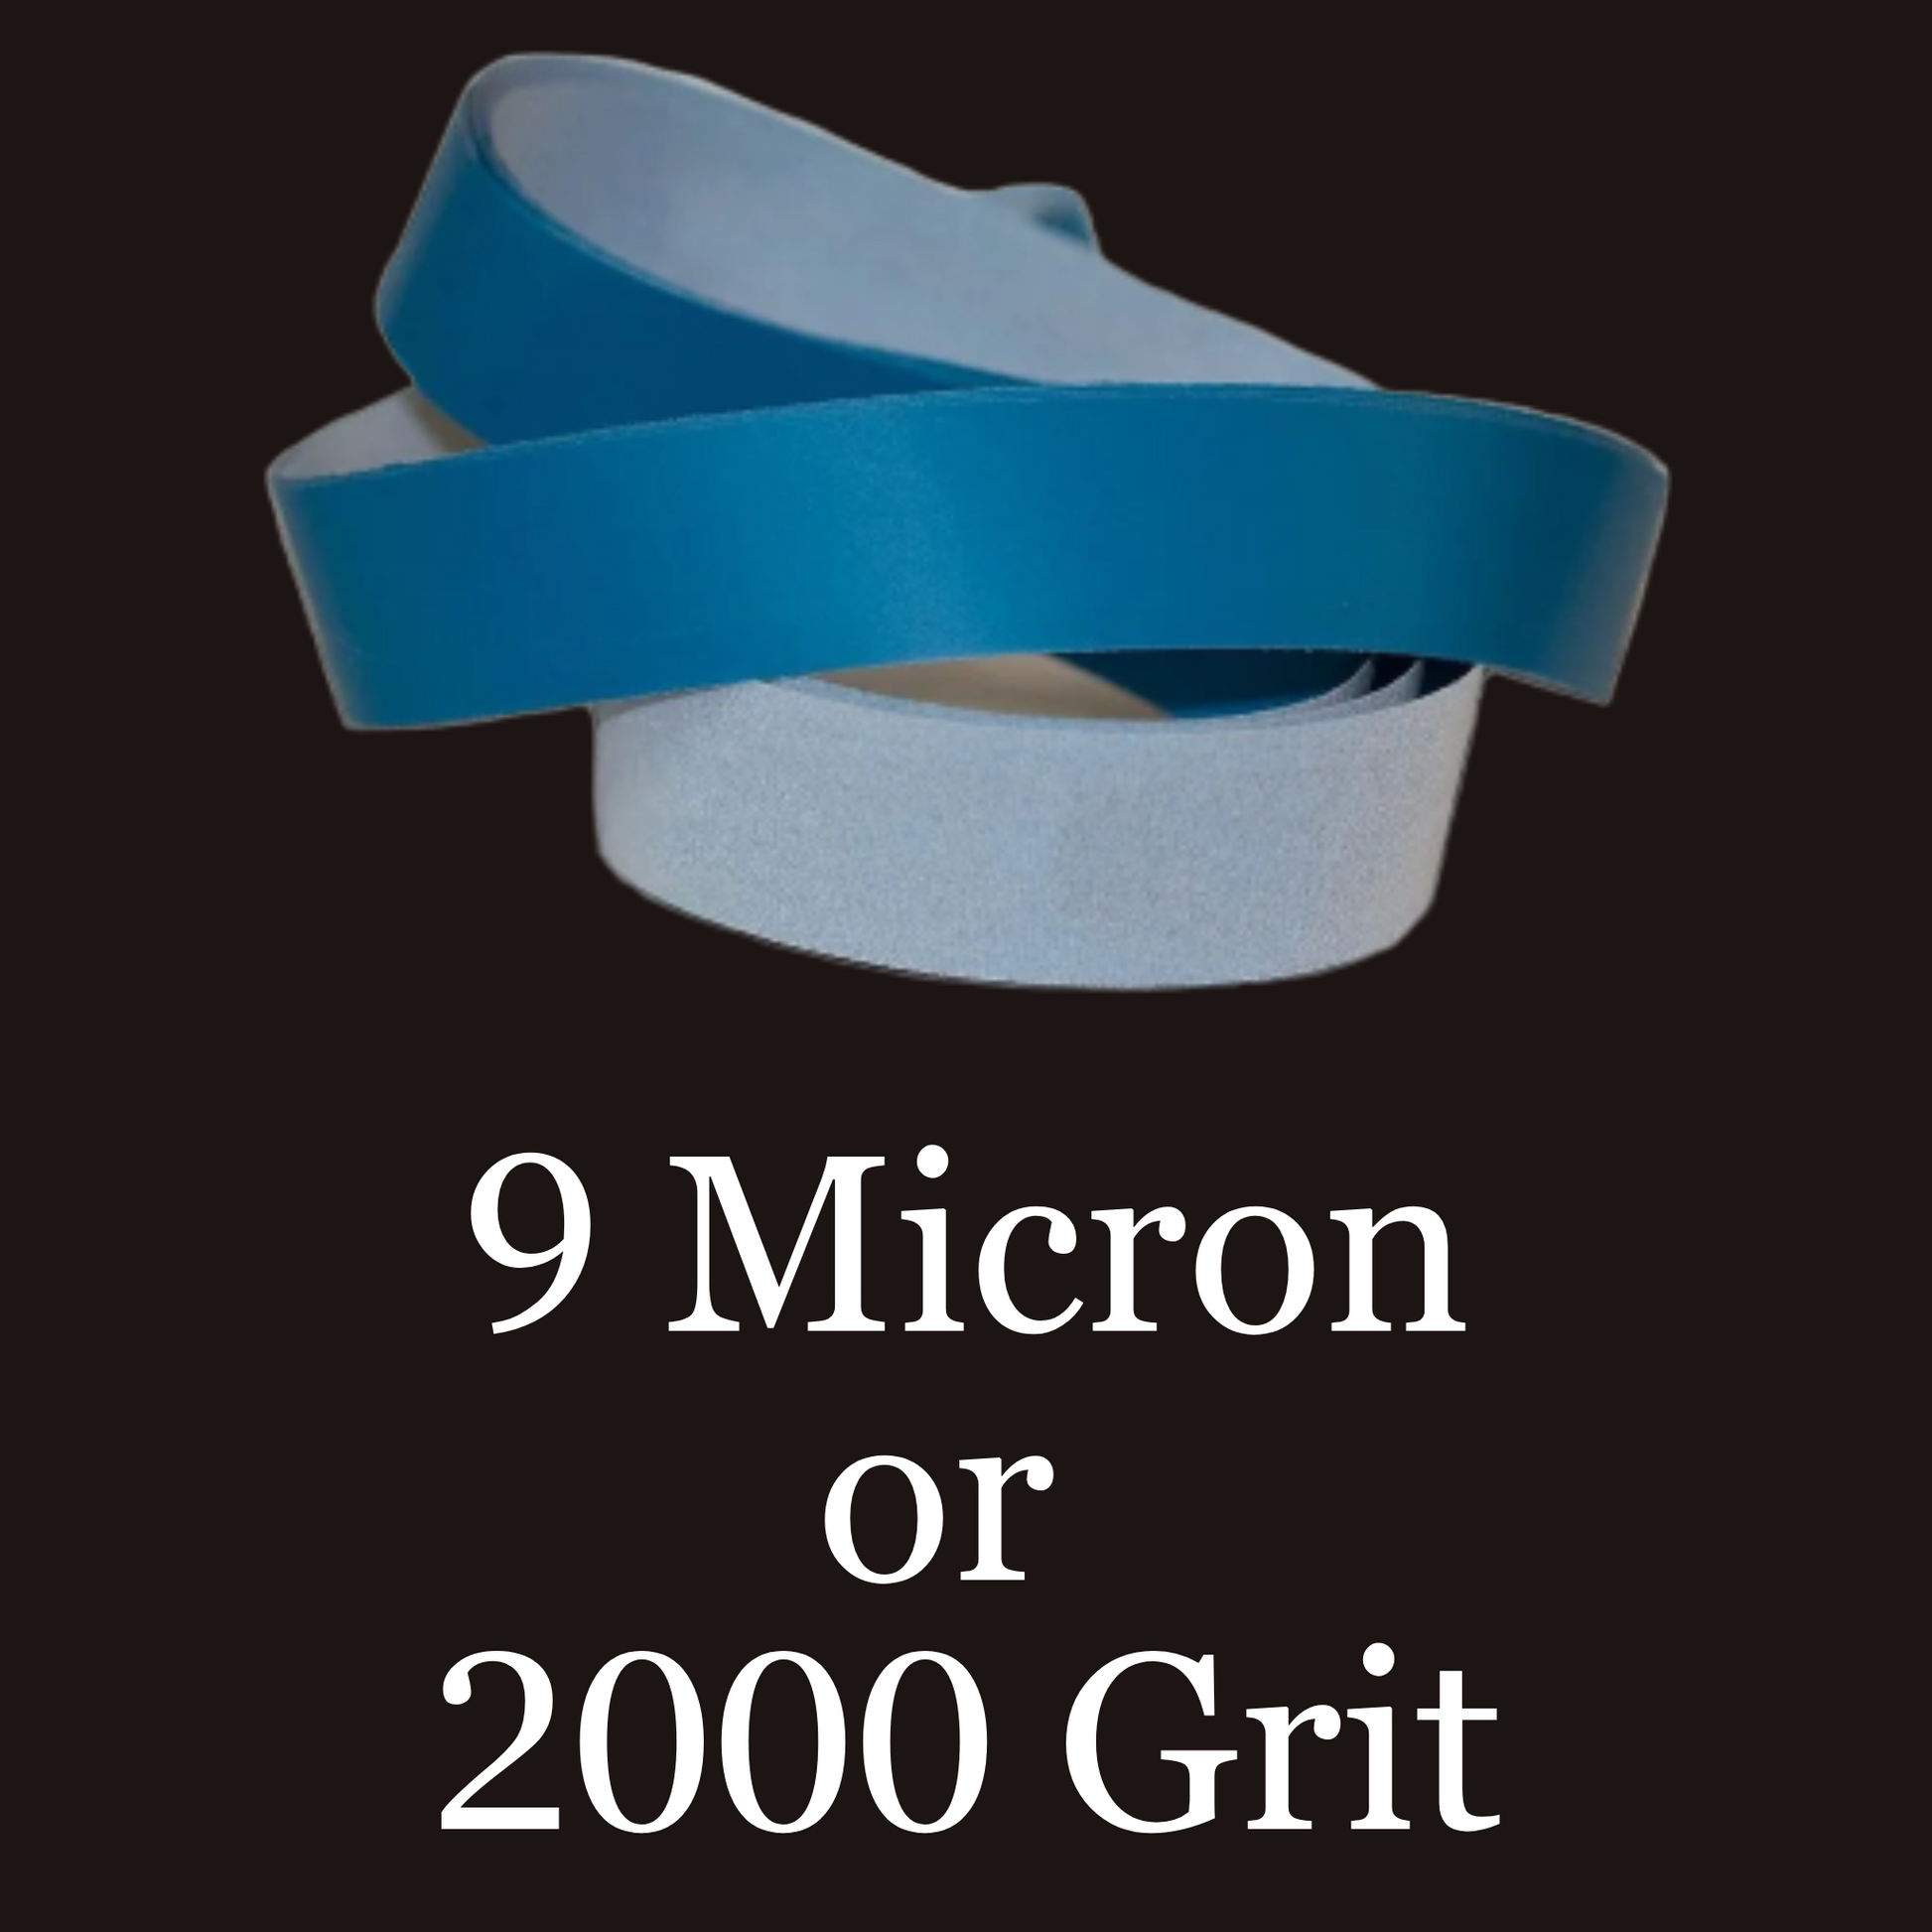 4” x 36” Film Micron Graded Finishing Belts 9 Micron or 2000 Grit